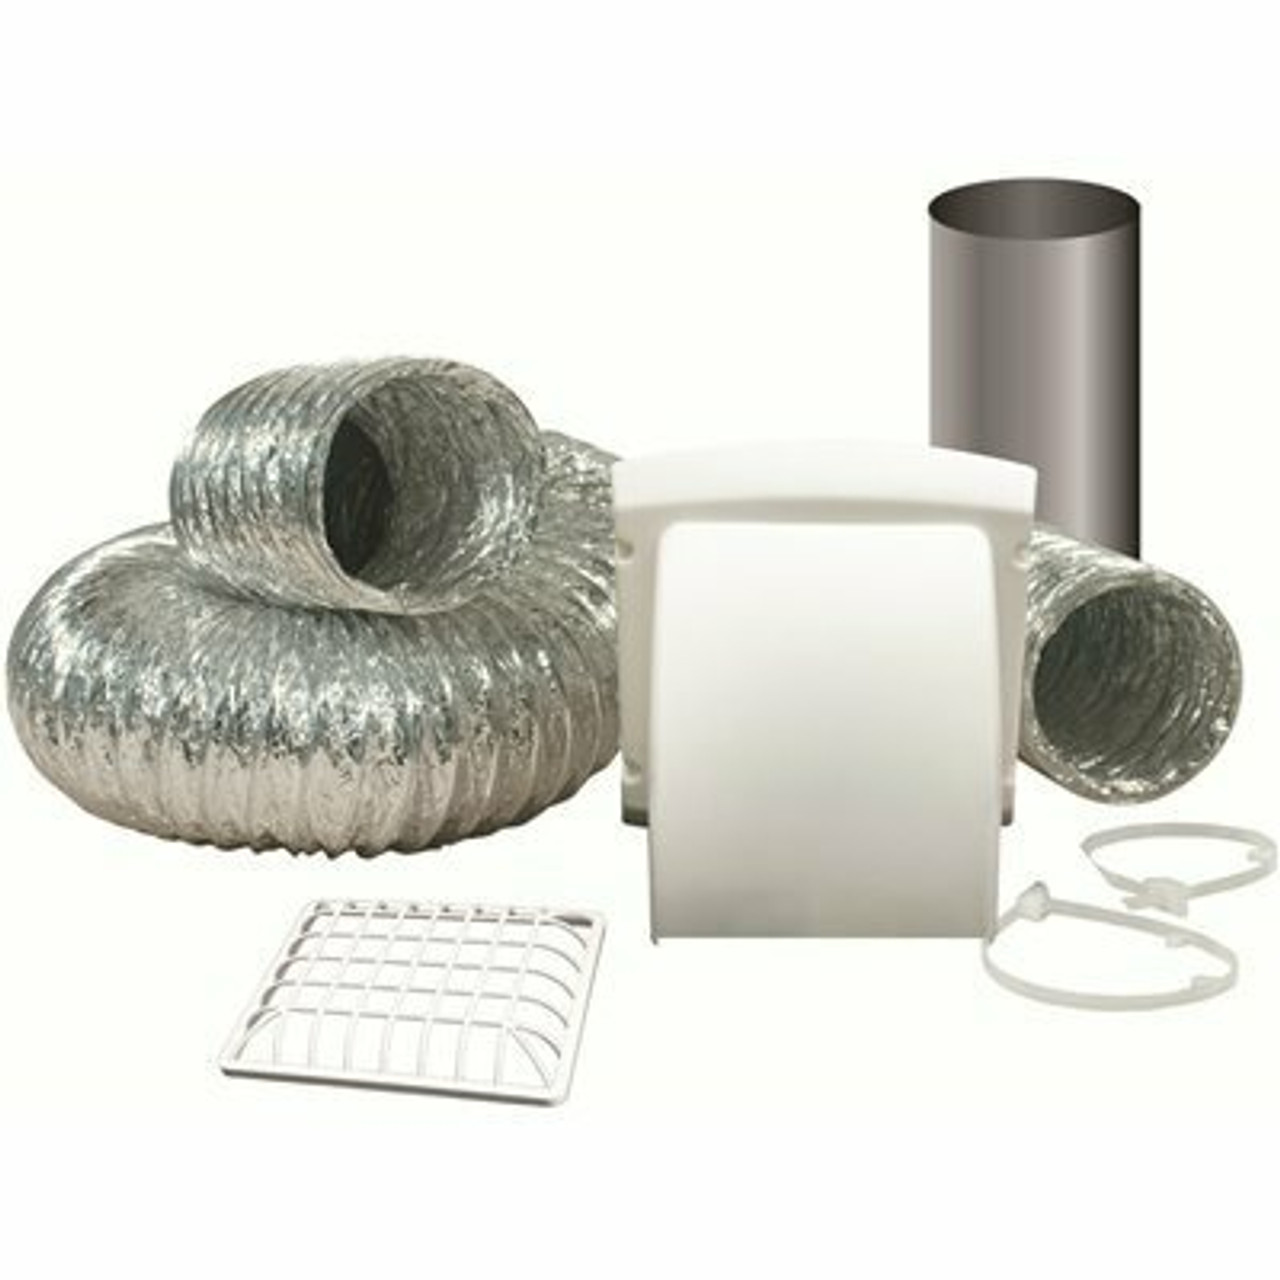 Everbilt Wide Mouth Dryer Vent Kit With 4 In. X 8 Ft. Aluminum Dryer Duct